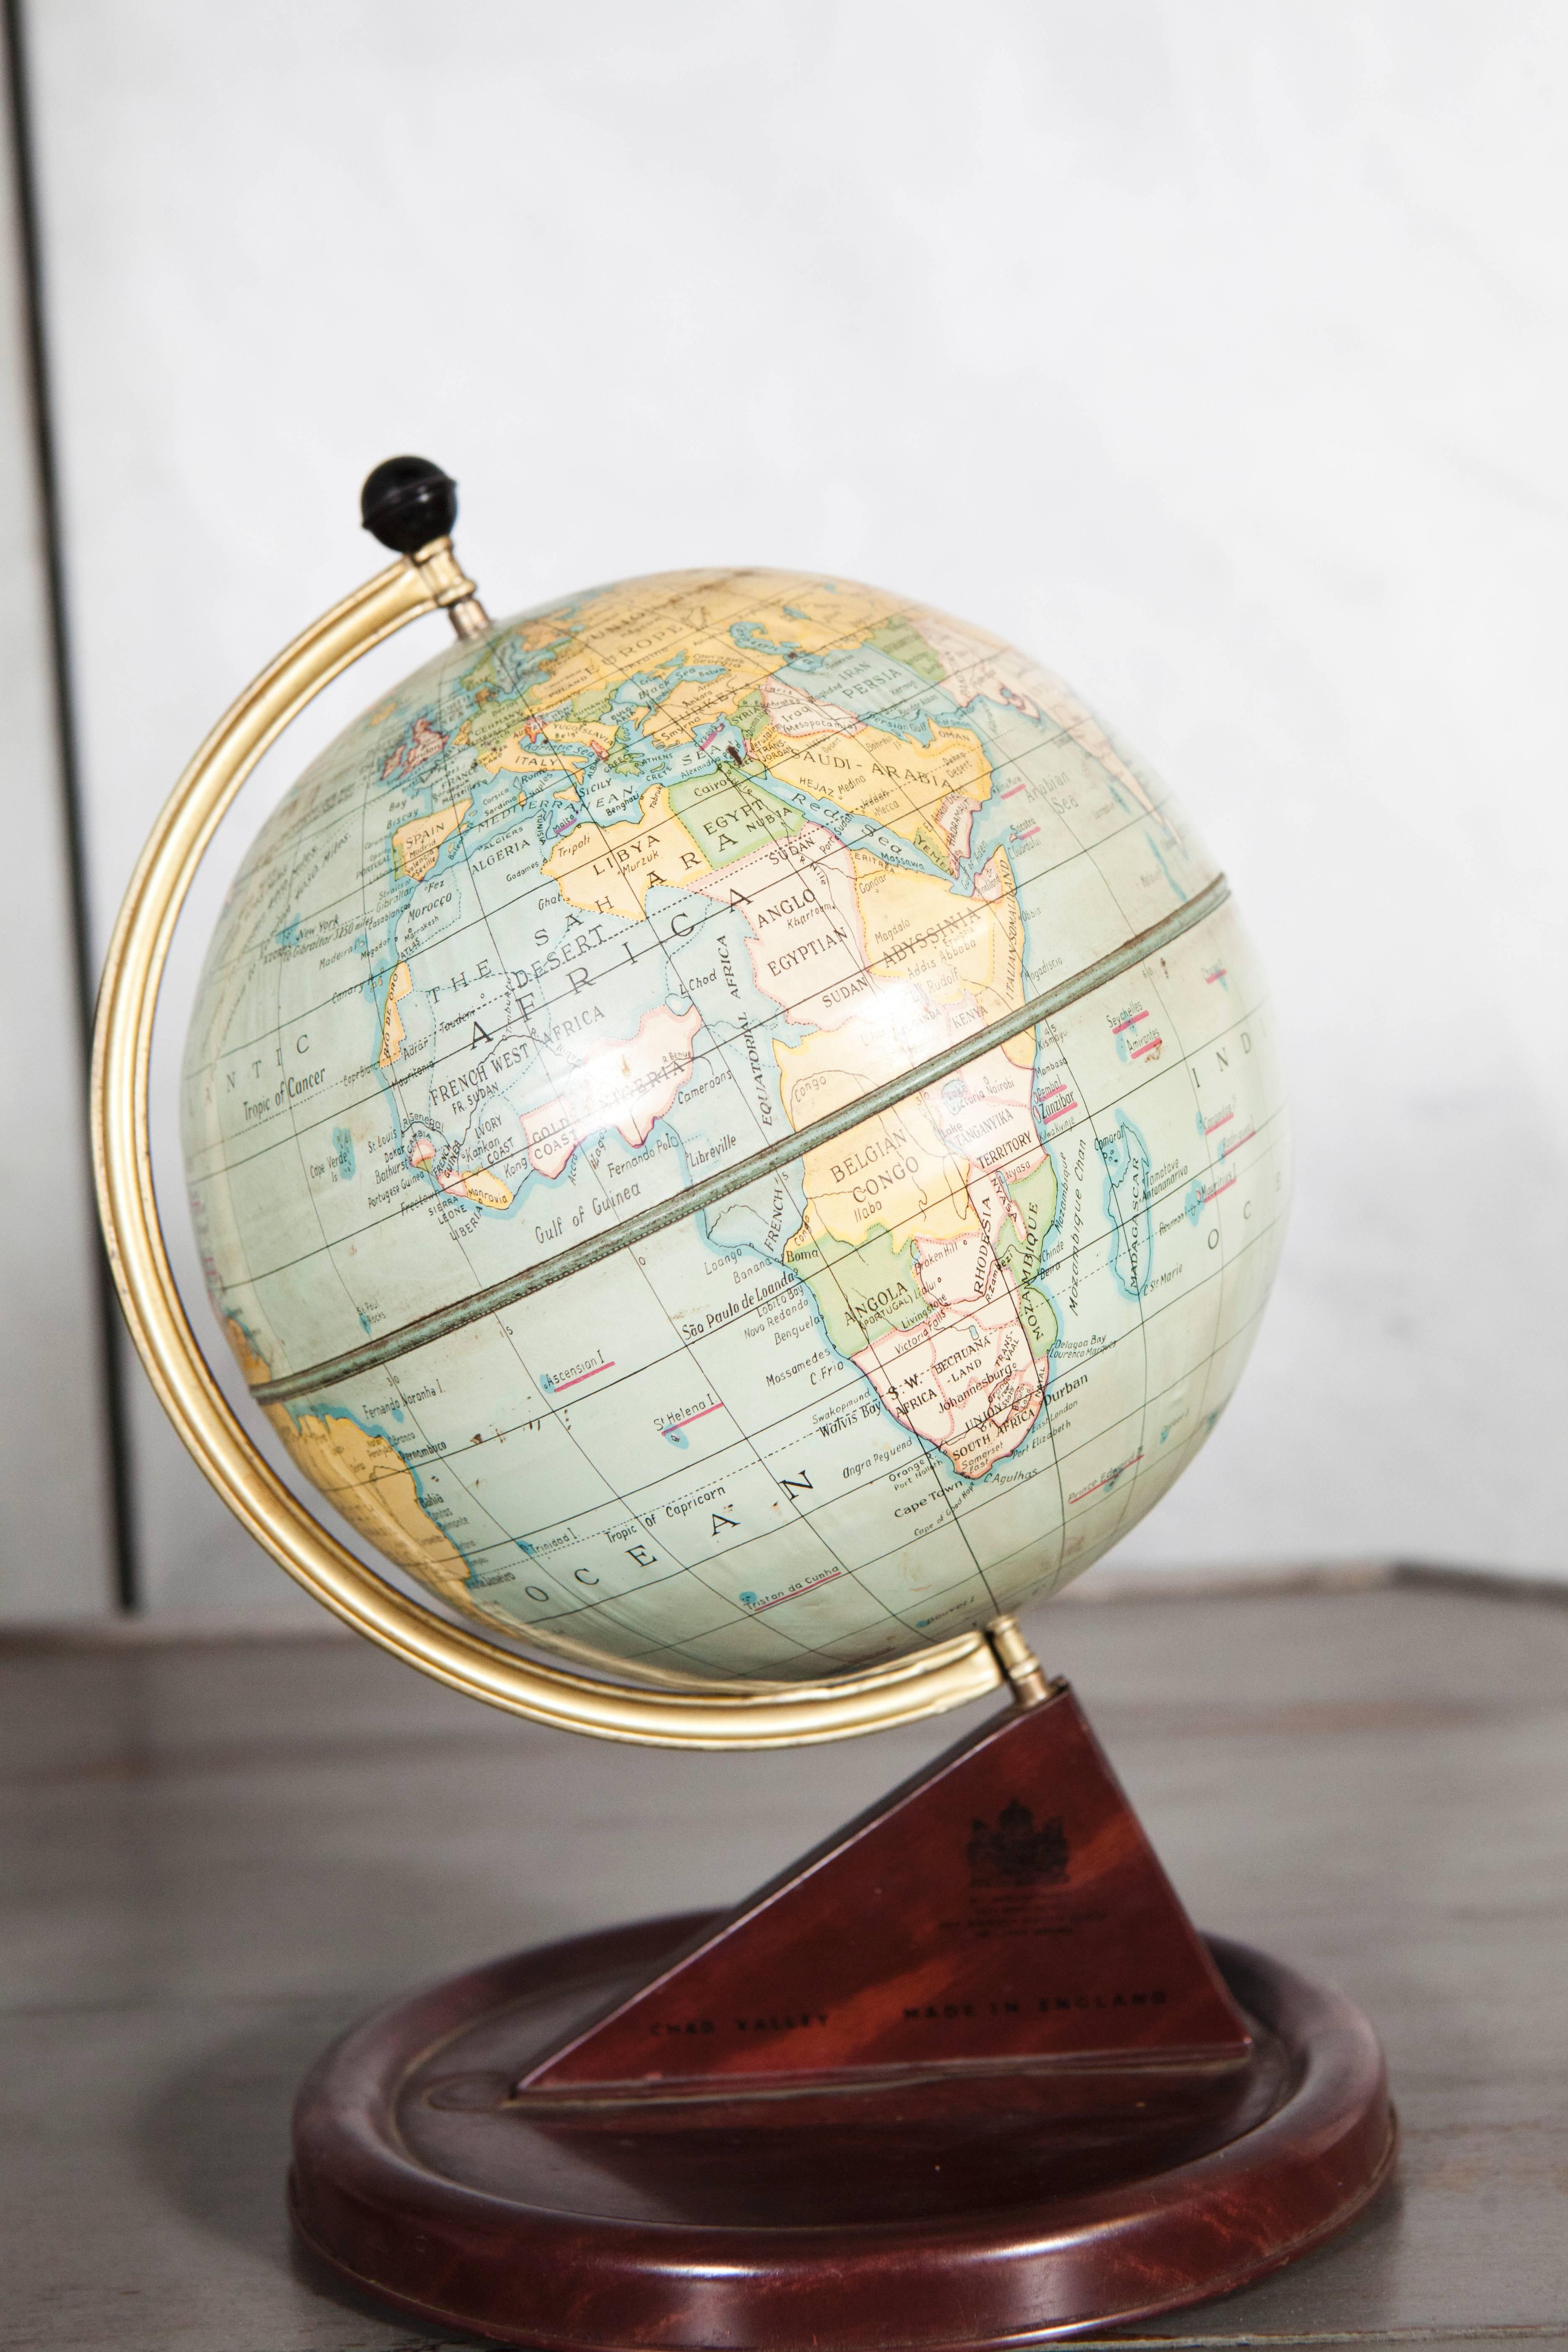 This child's globe has the maker's label from Chad Valley Toy Company in England. This 1920's globe and has nice art deco design elements with wood grain painted metal surface of the bases. An excellent decorative item for a variety of settings this